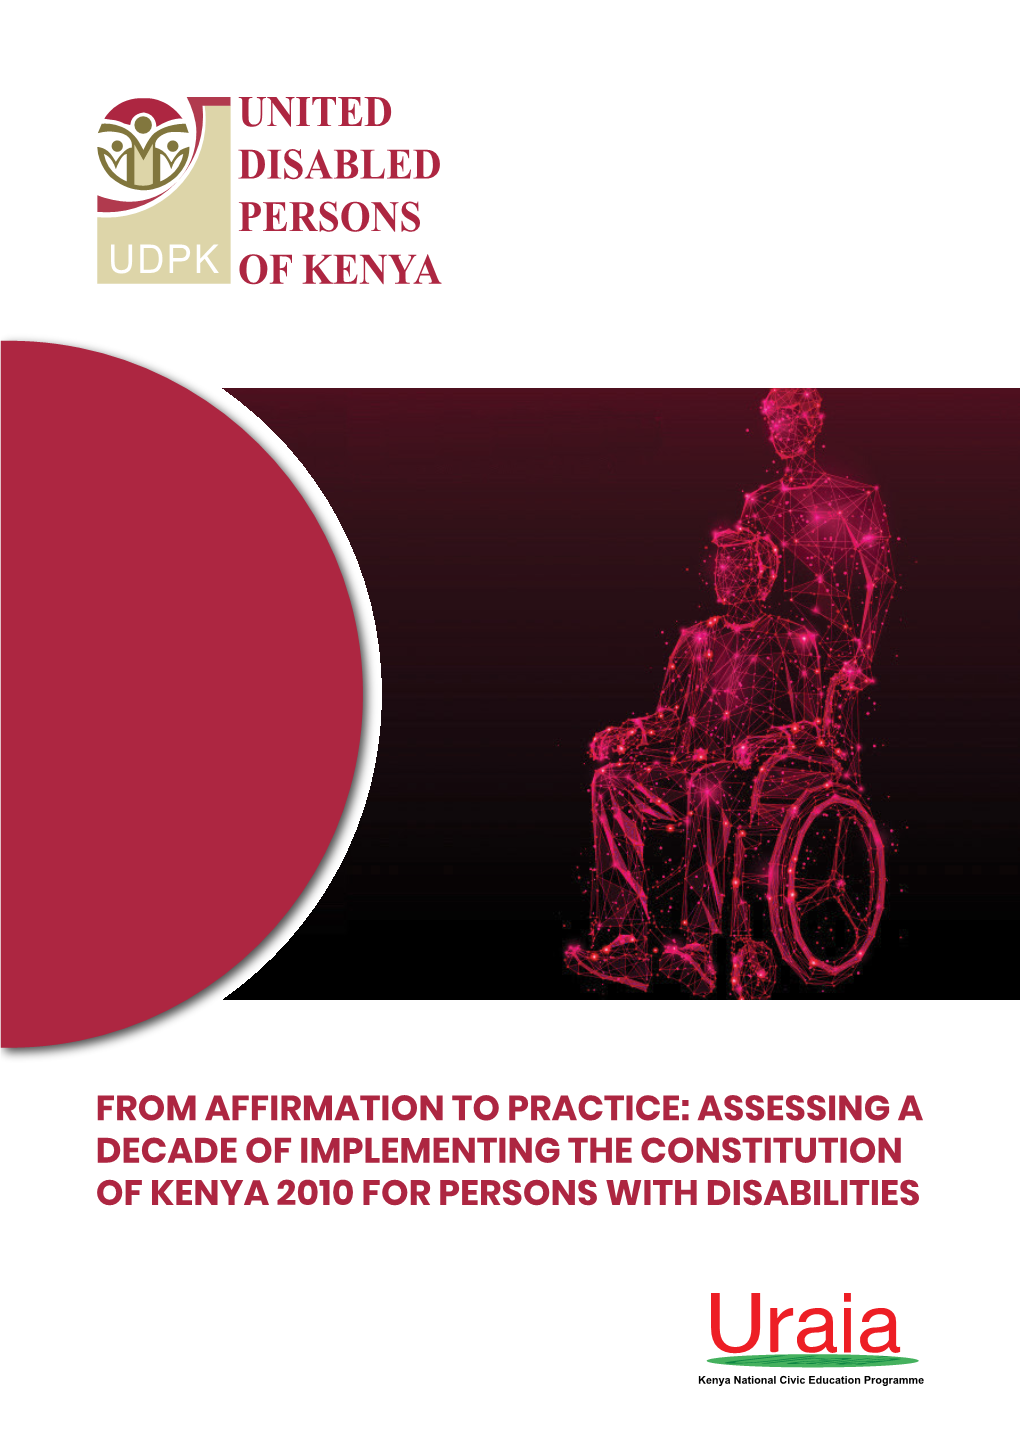 Assessing a Decade of Implementing the Constitution of Kenya 2010 for Persons with Disabilities